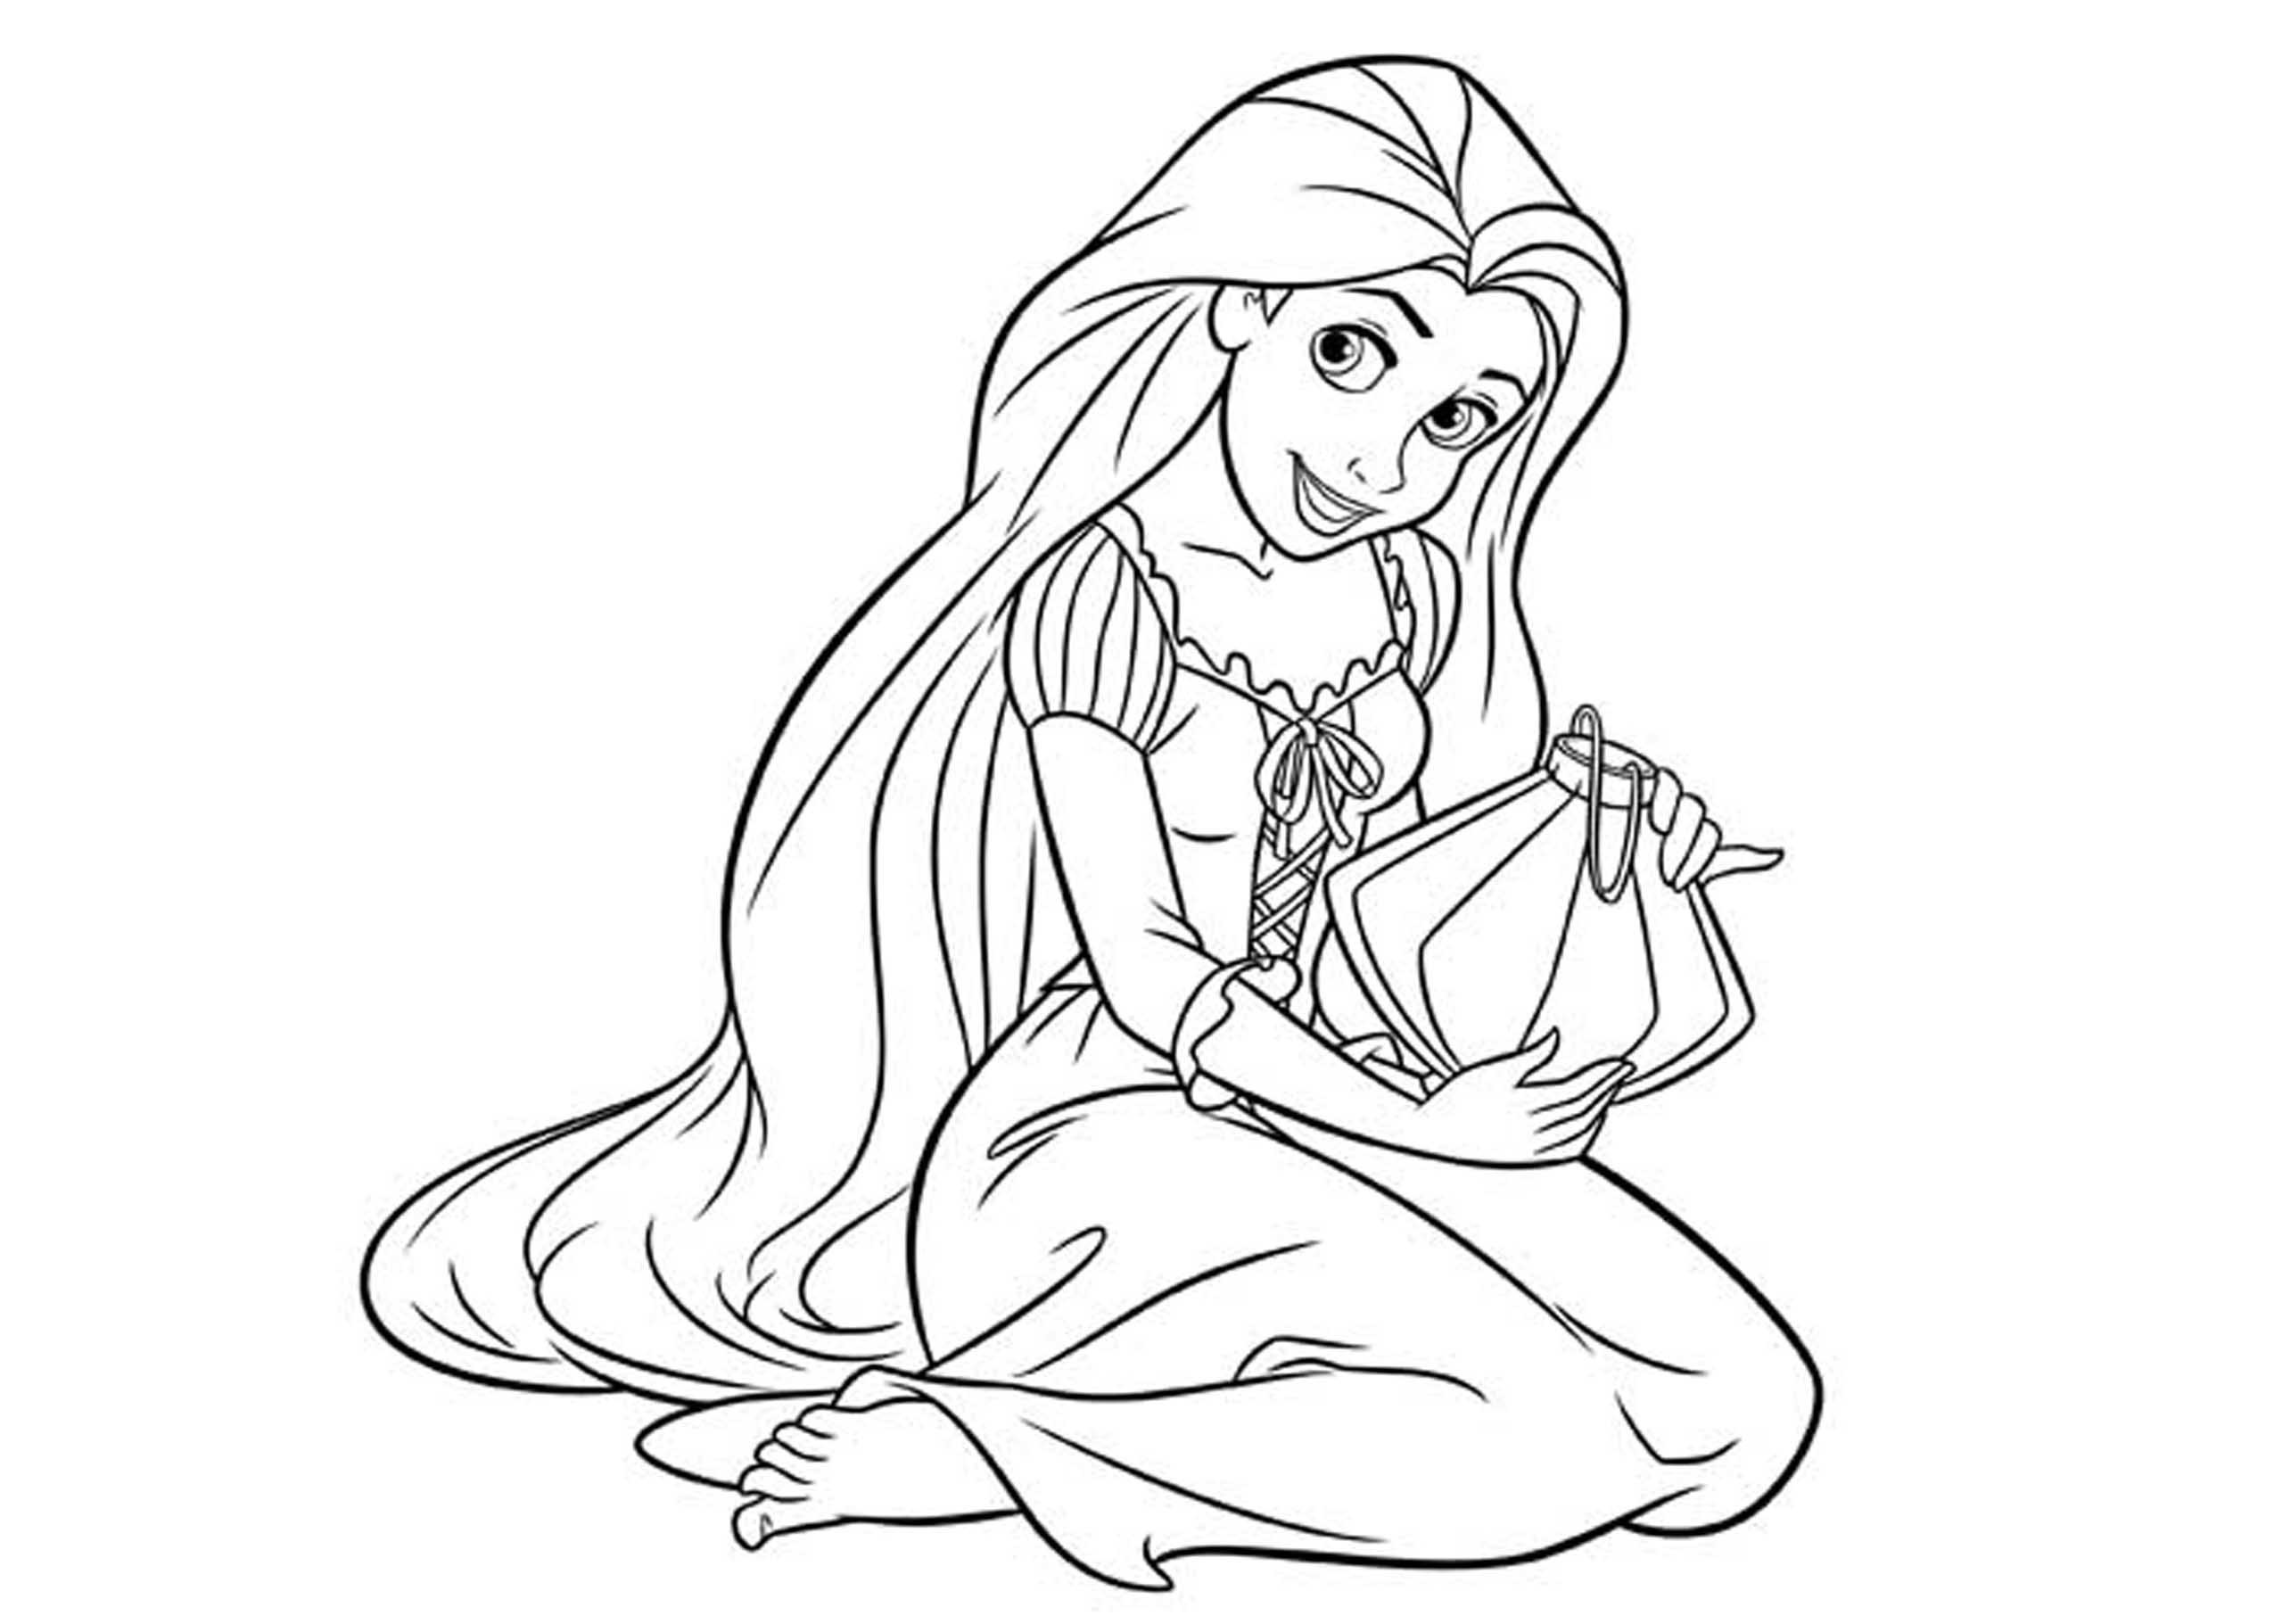 Disney Princess Coloring Pages and Activities